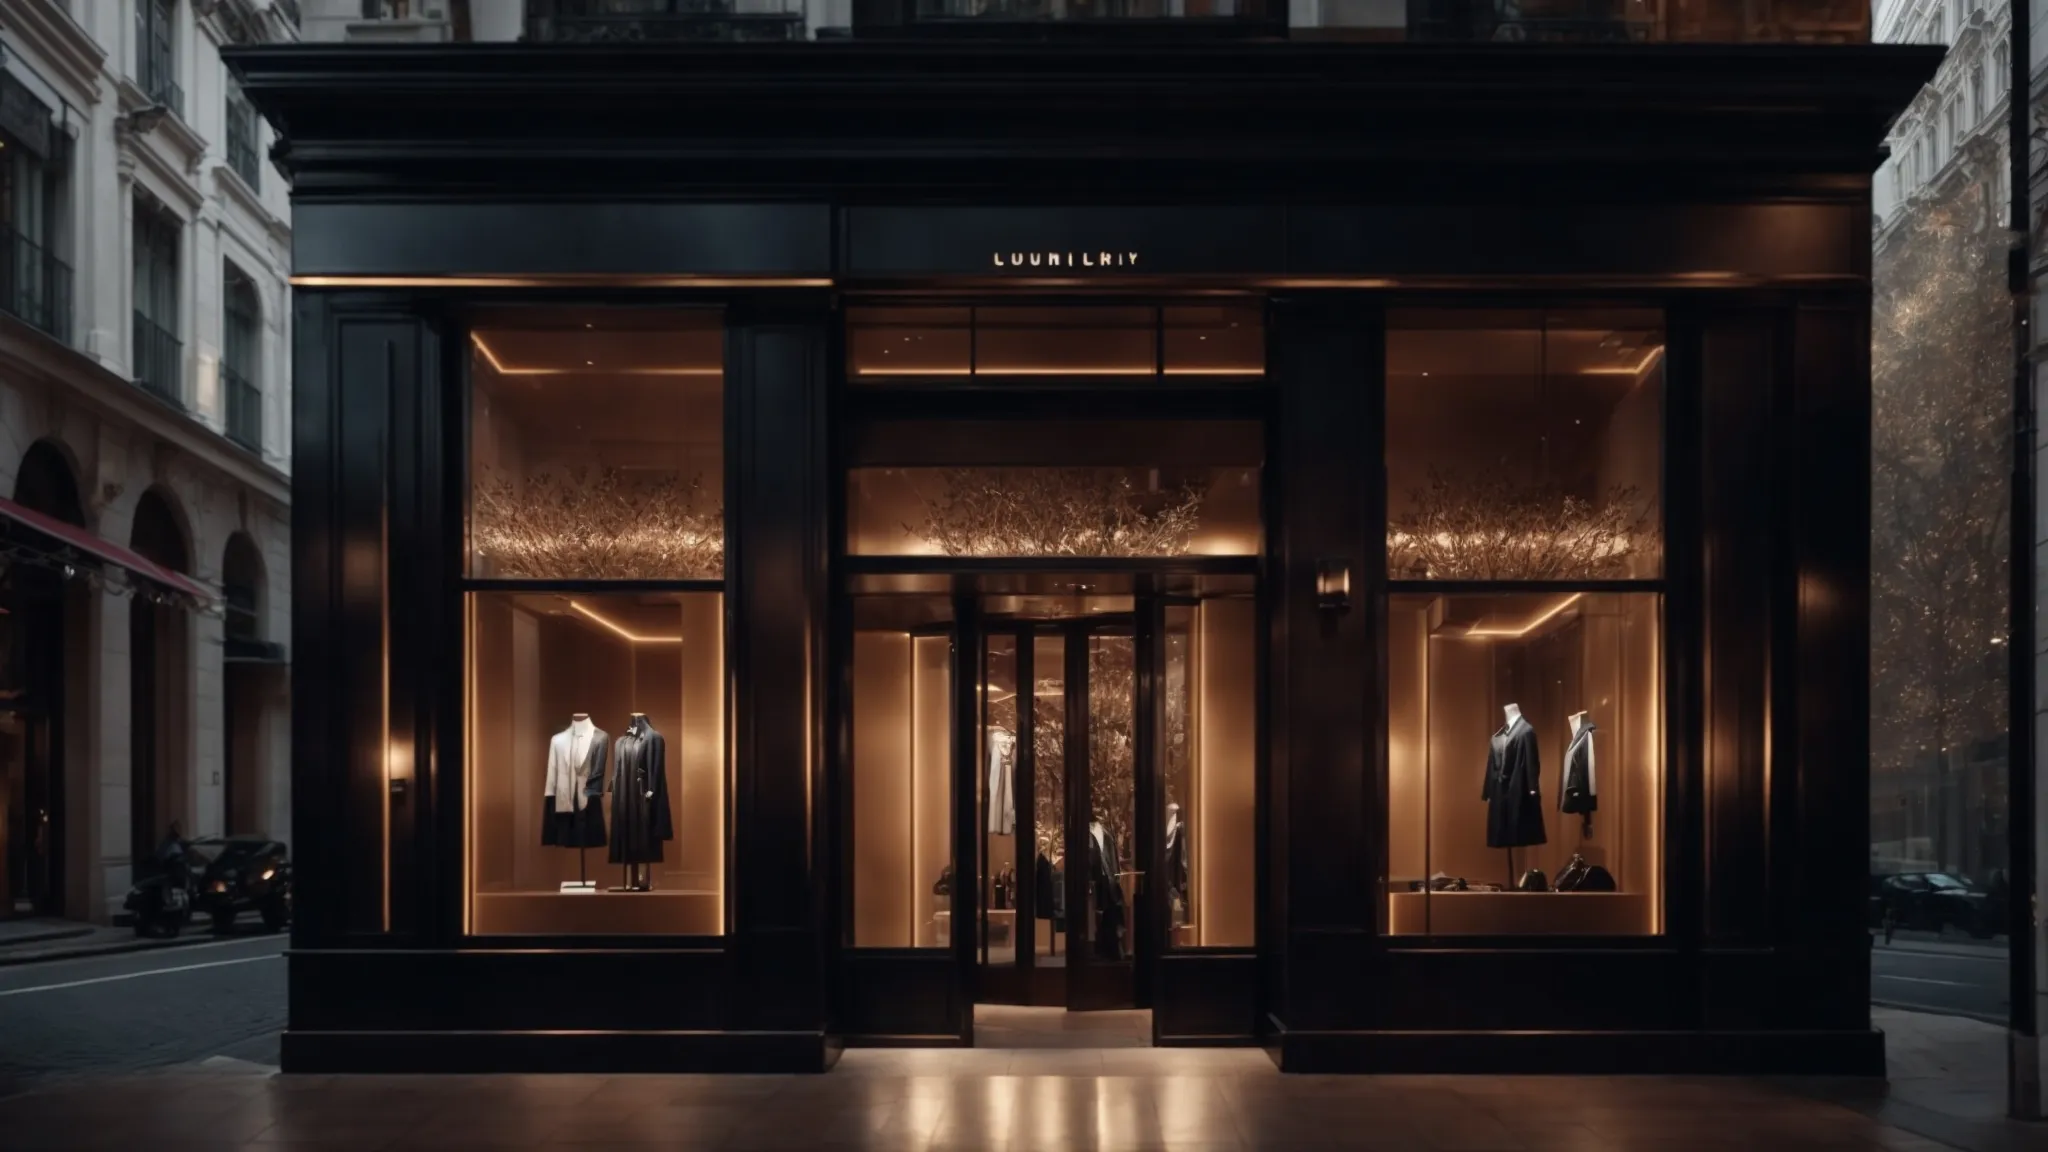 a luxury brand storefront elegantly illuminated, welcoming shoppers into an immersive shopping experience merging the digital and physical realms.